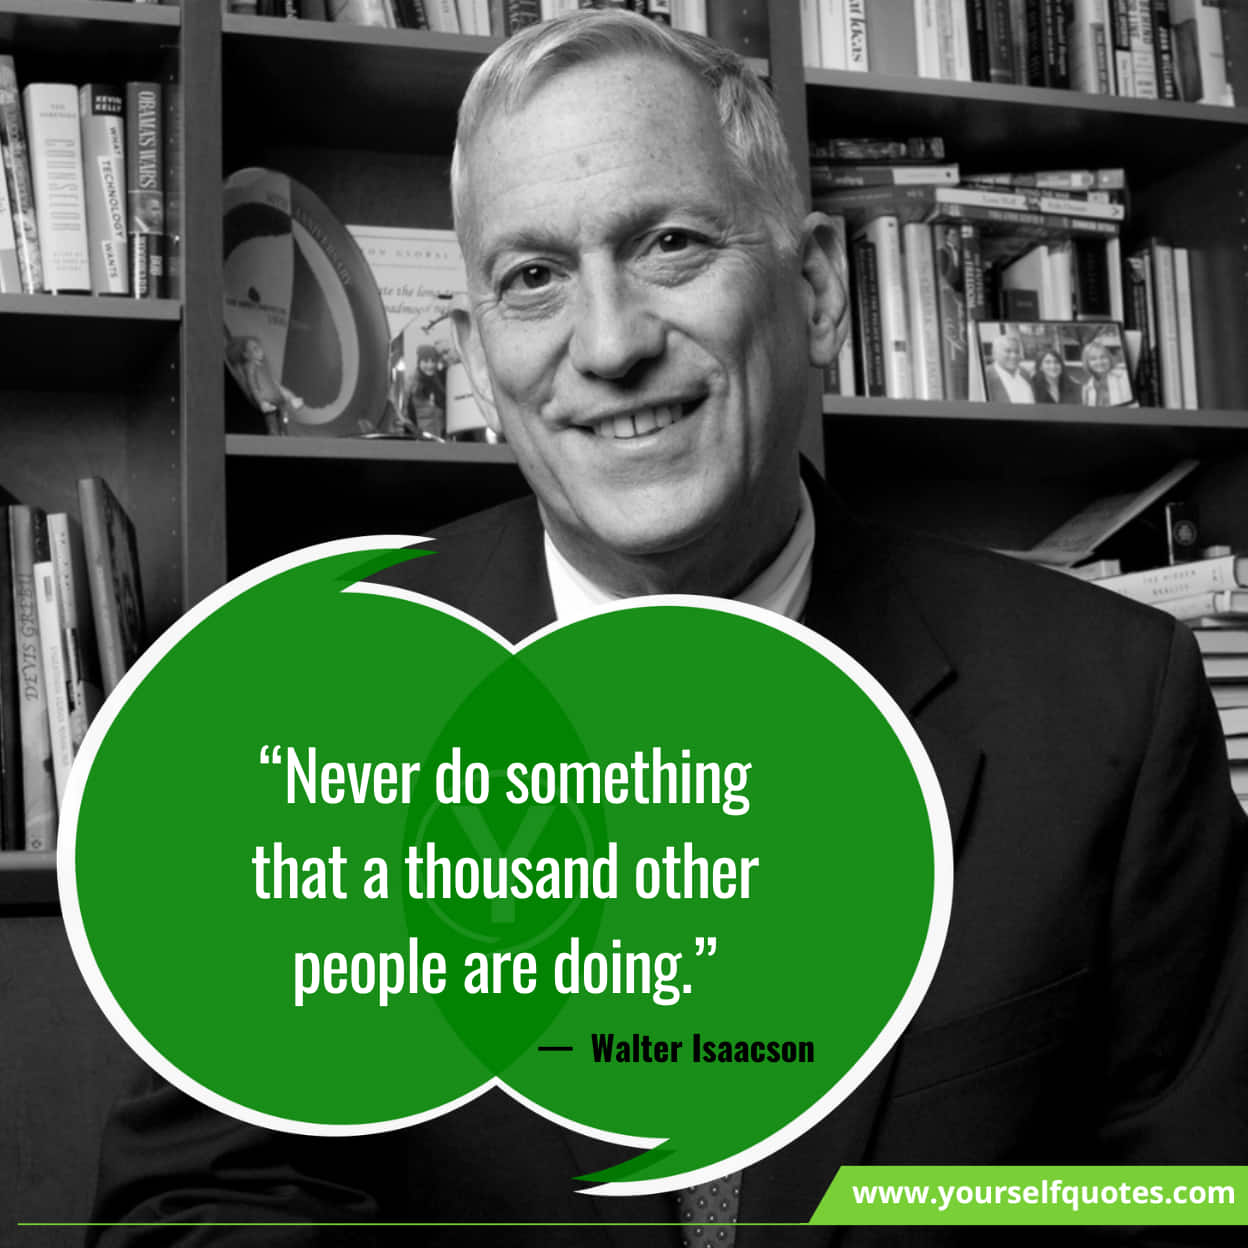 Quotes By Walter Isaacson